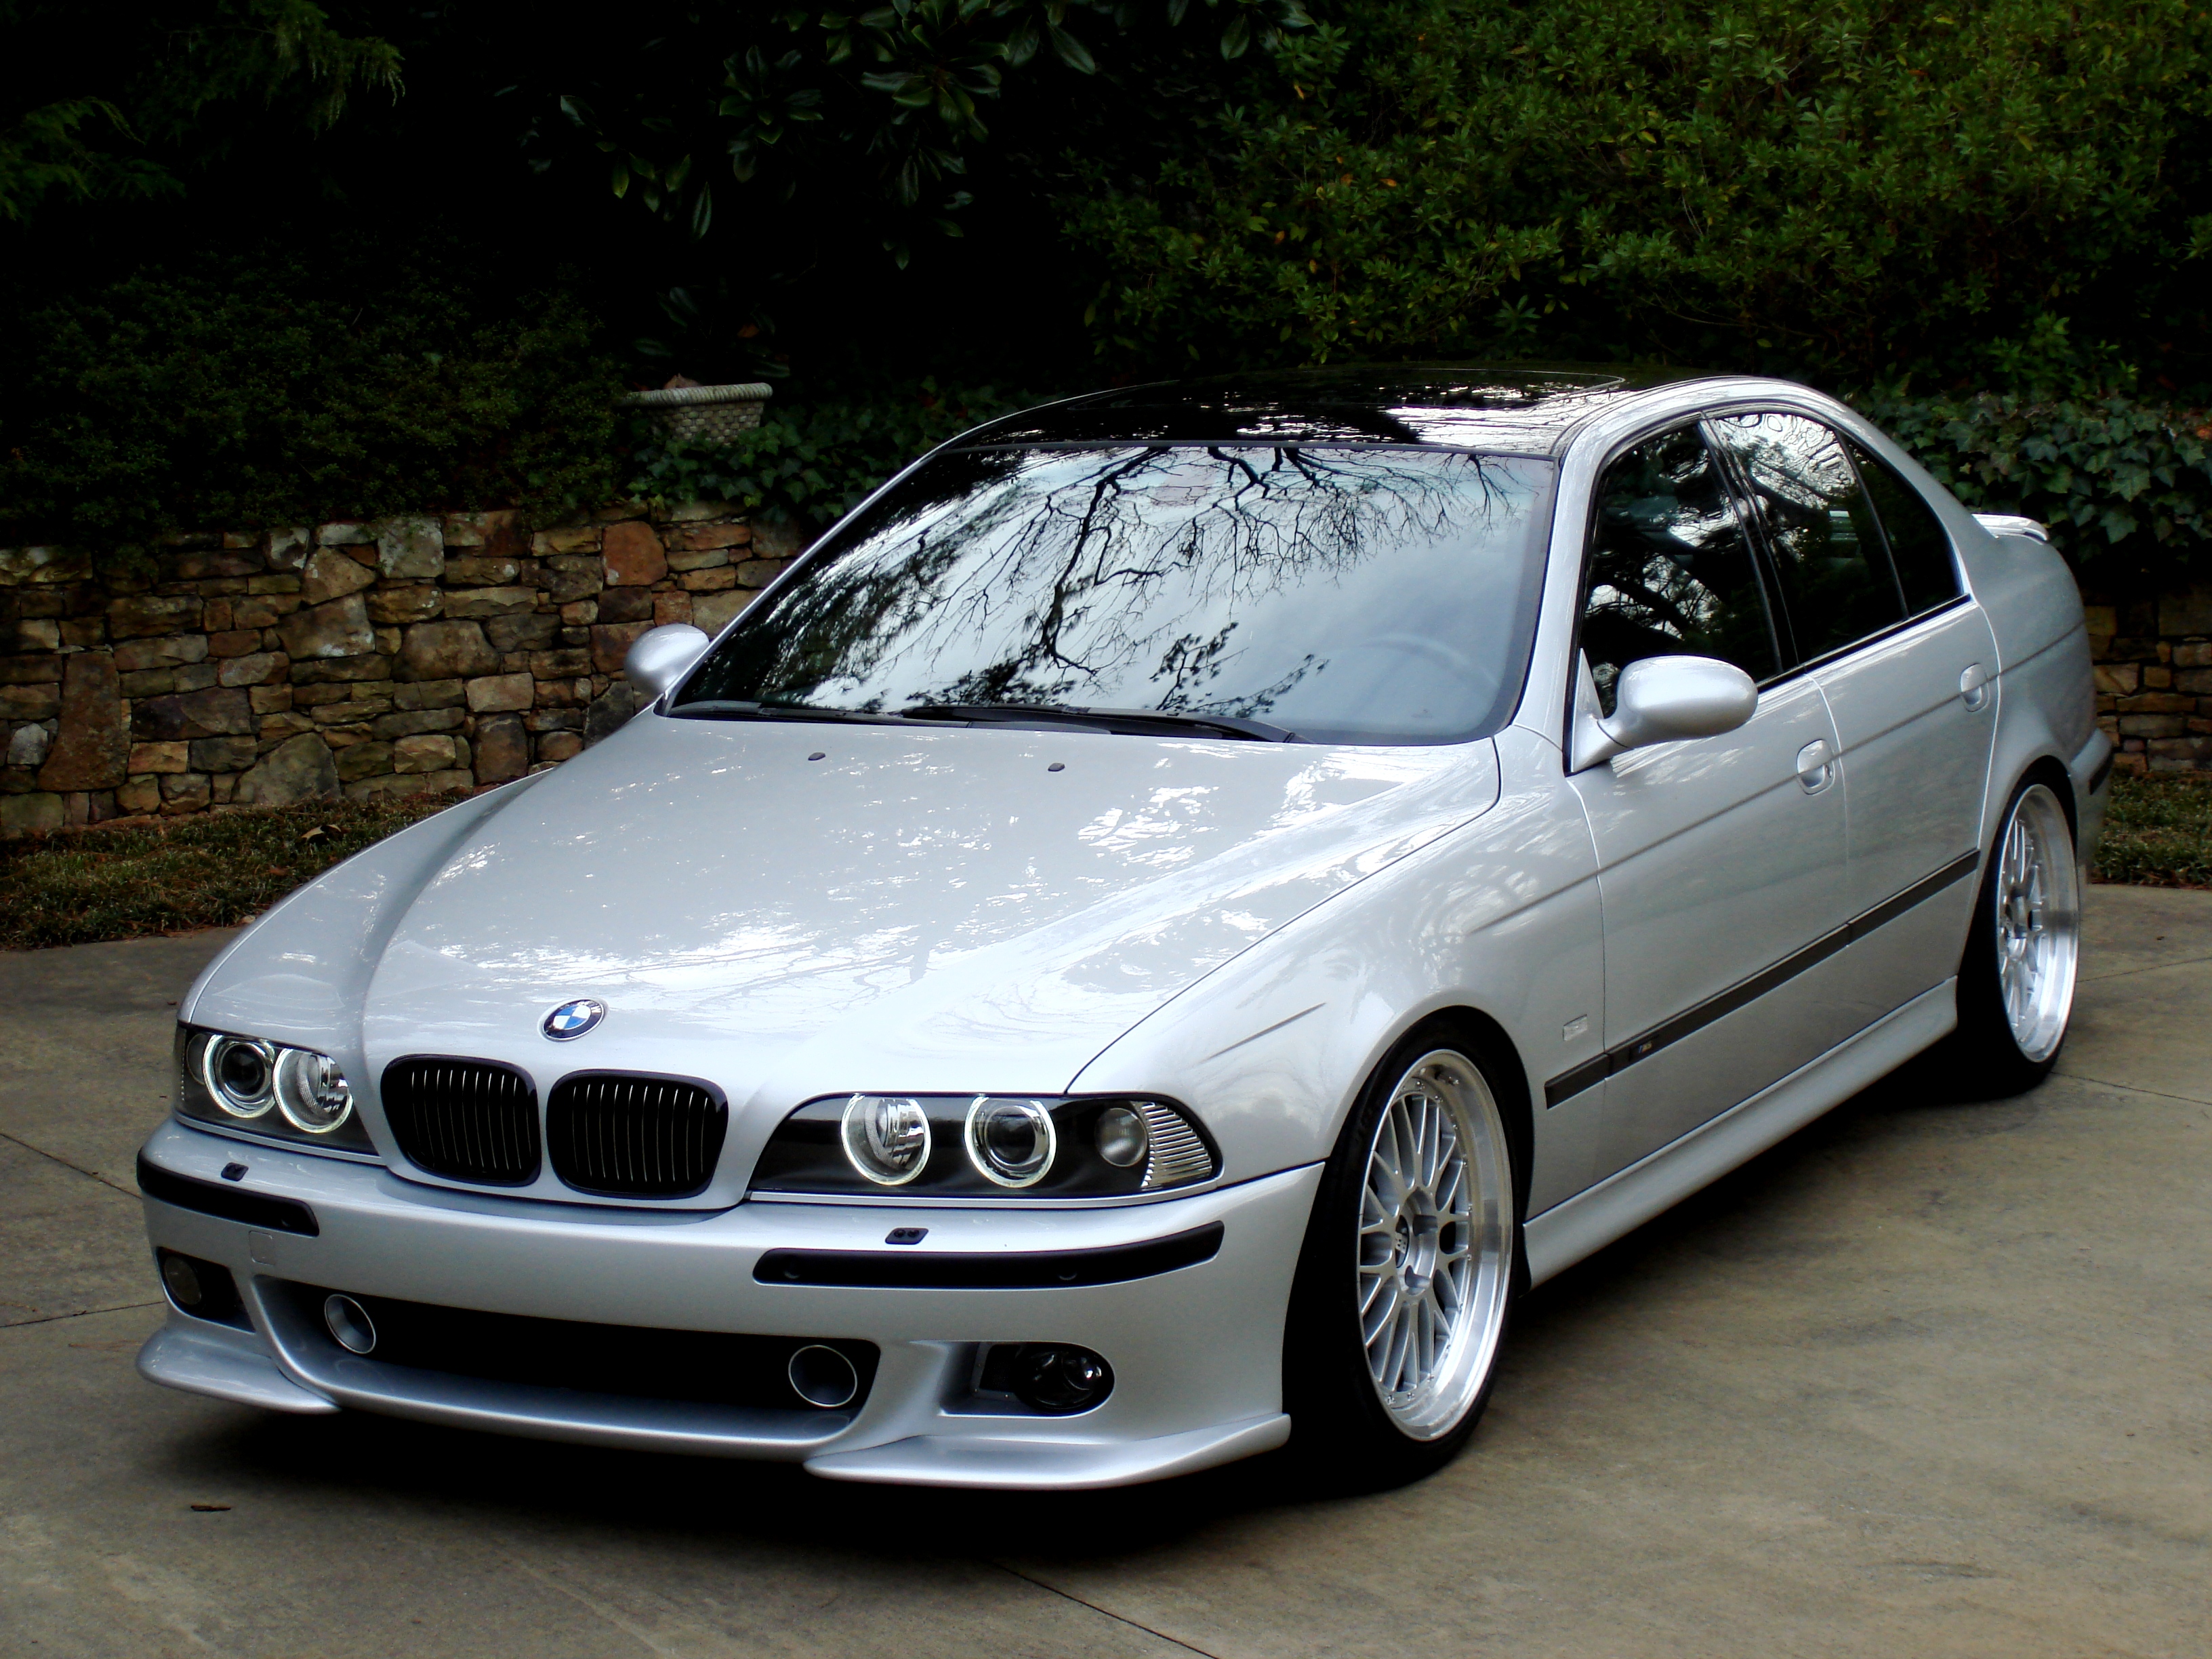 HQ Bmw E39 Wallpapers | File 3242.25Kb